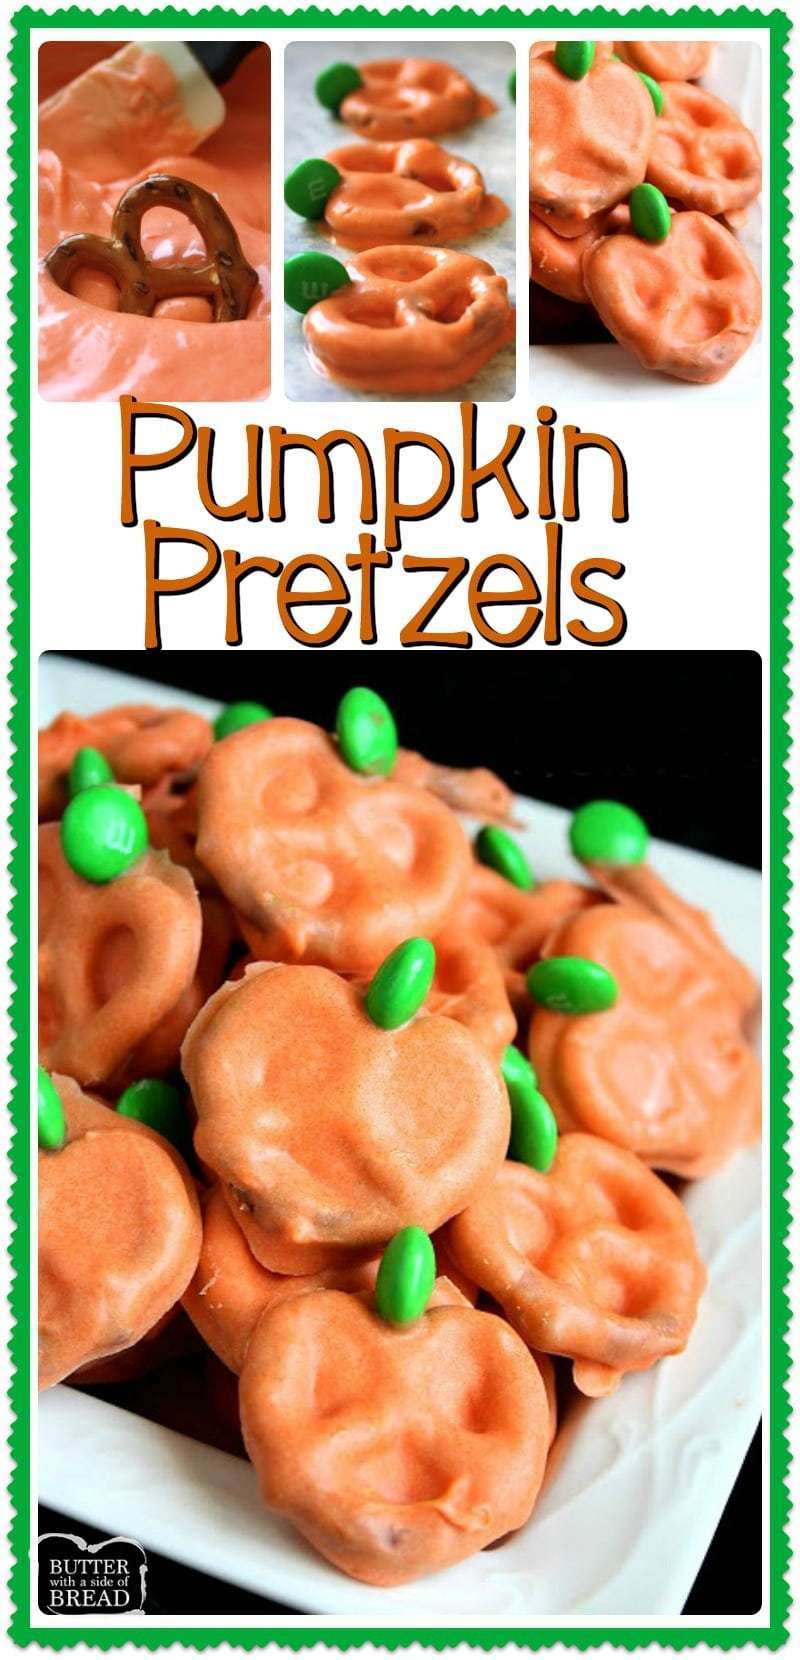 Pumpkin Pretzels are chocolate covered pretzels made with just a few ingredients & perfect for Halloween! Tips for melting chocolate & the BEST tool to use to make these darling chocolate covered pretzels. Easy #Halloween #dessert from Butter With A Side of Bread